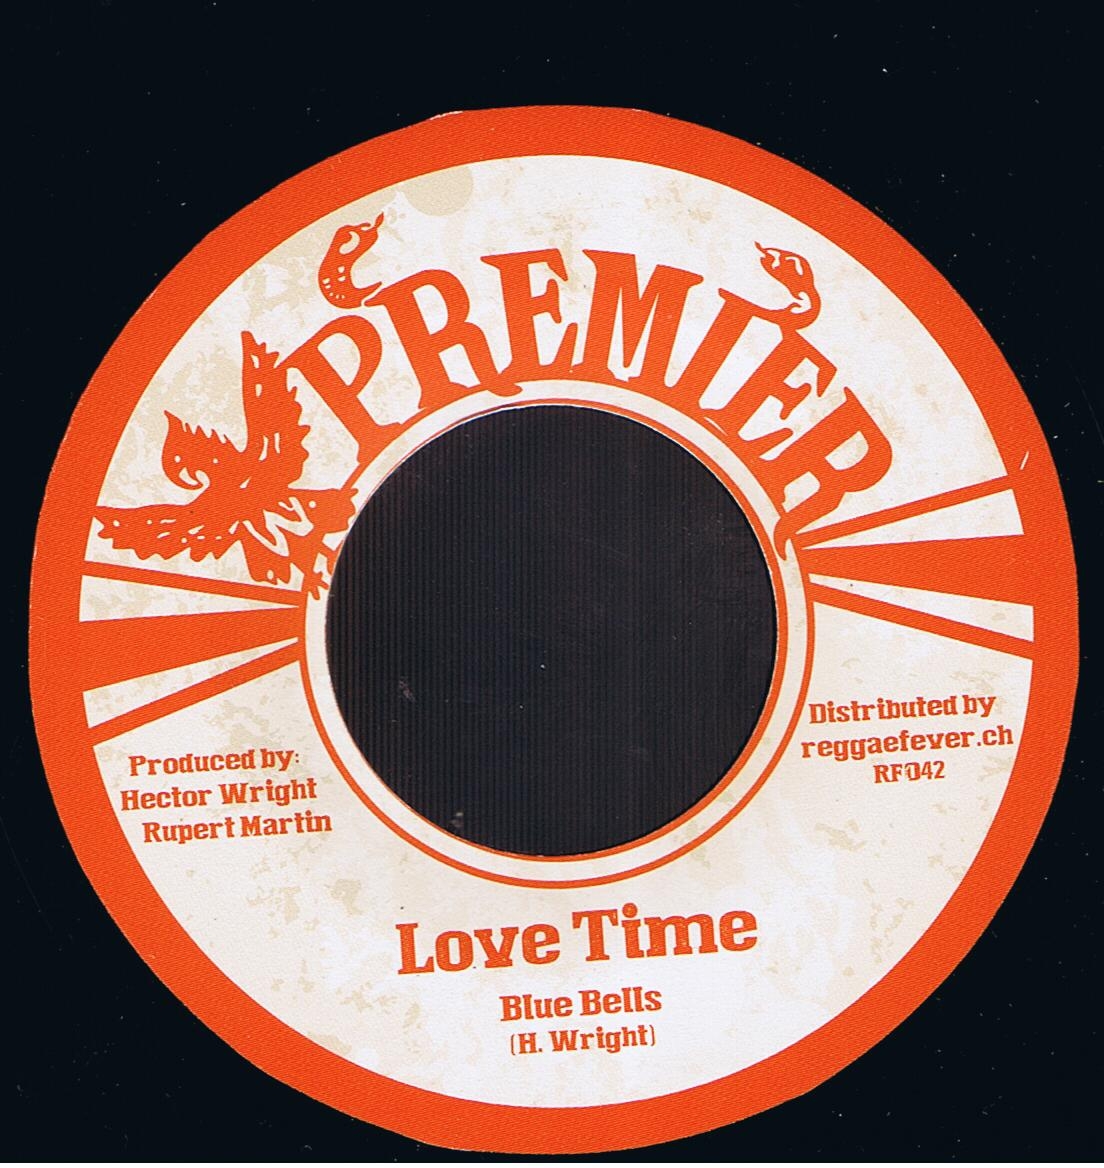 The Blue Bells - Love Time / The Blue Bells - Part Two Dub (7")